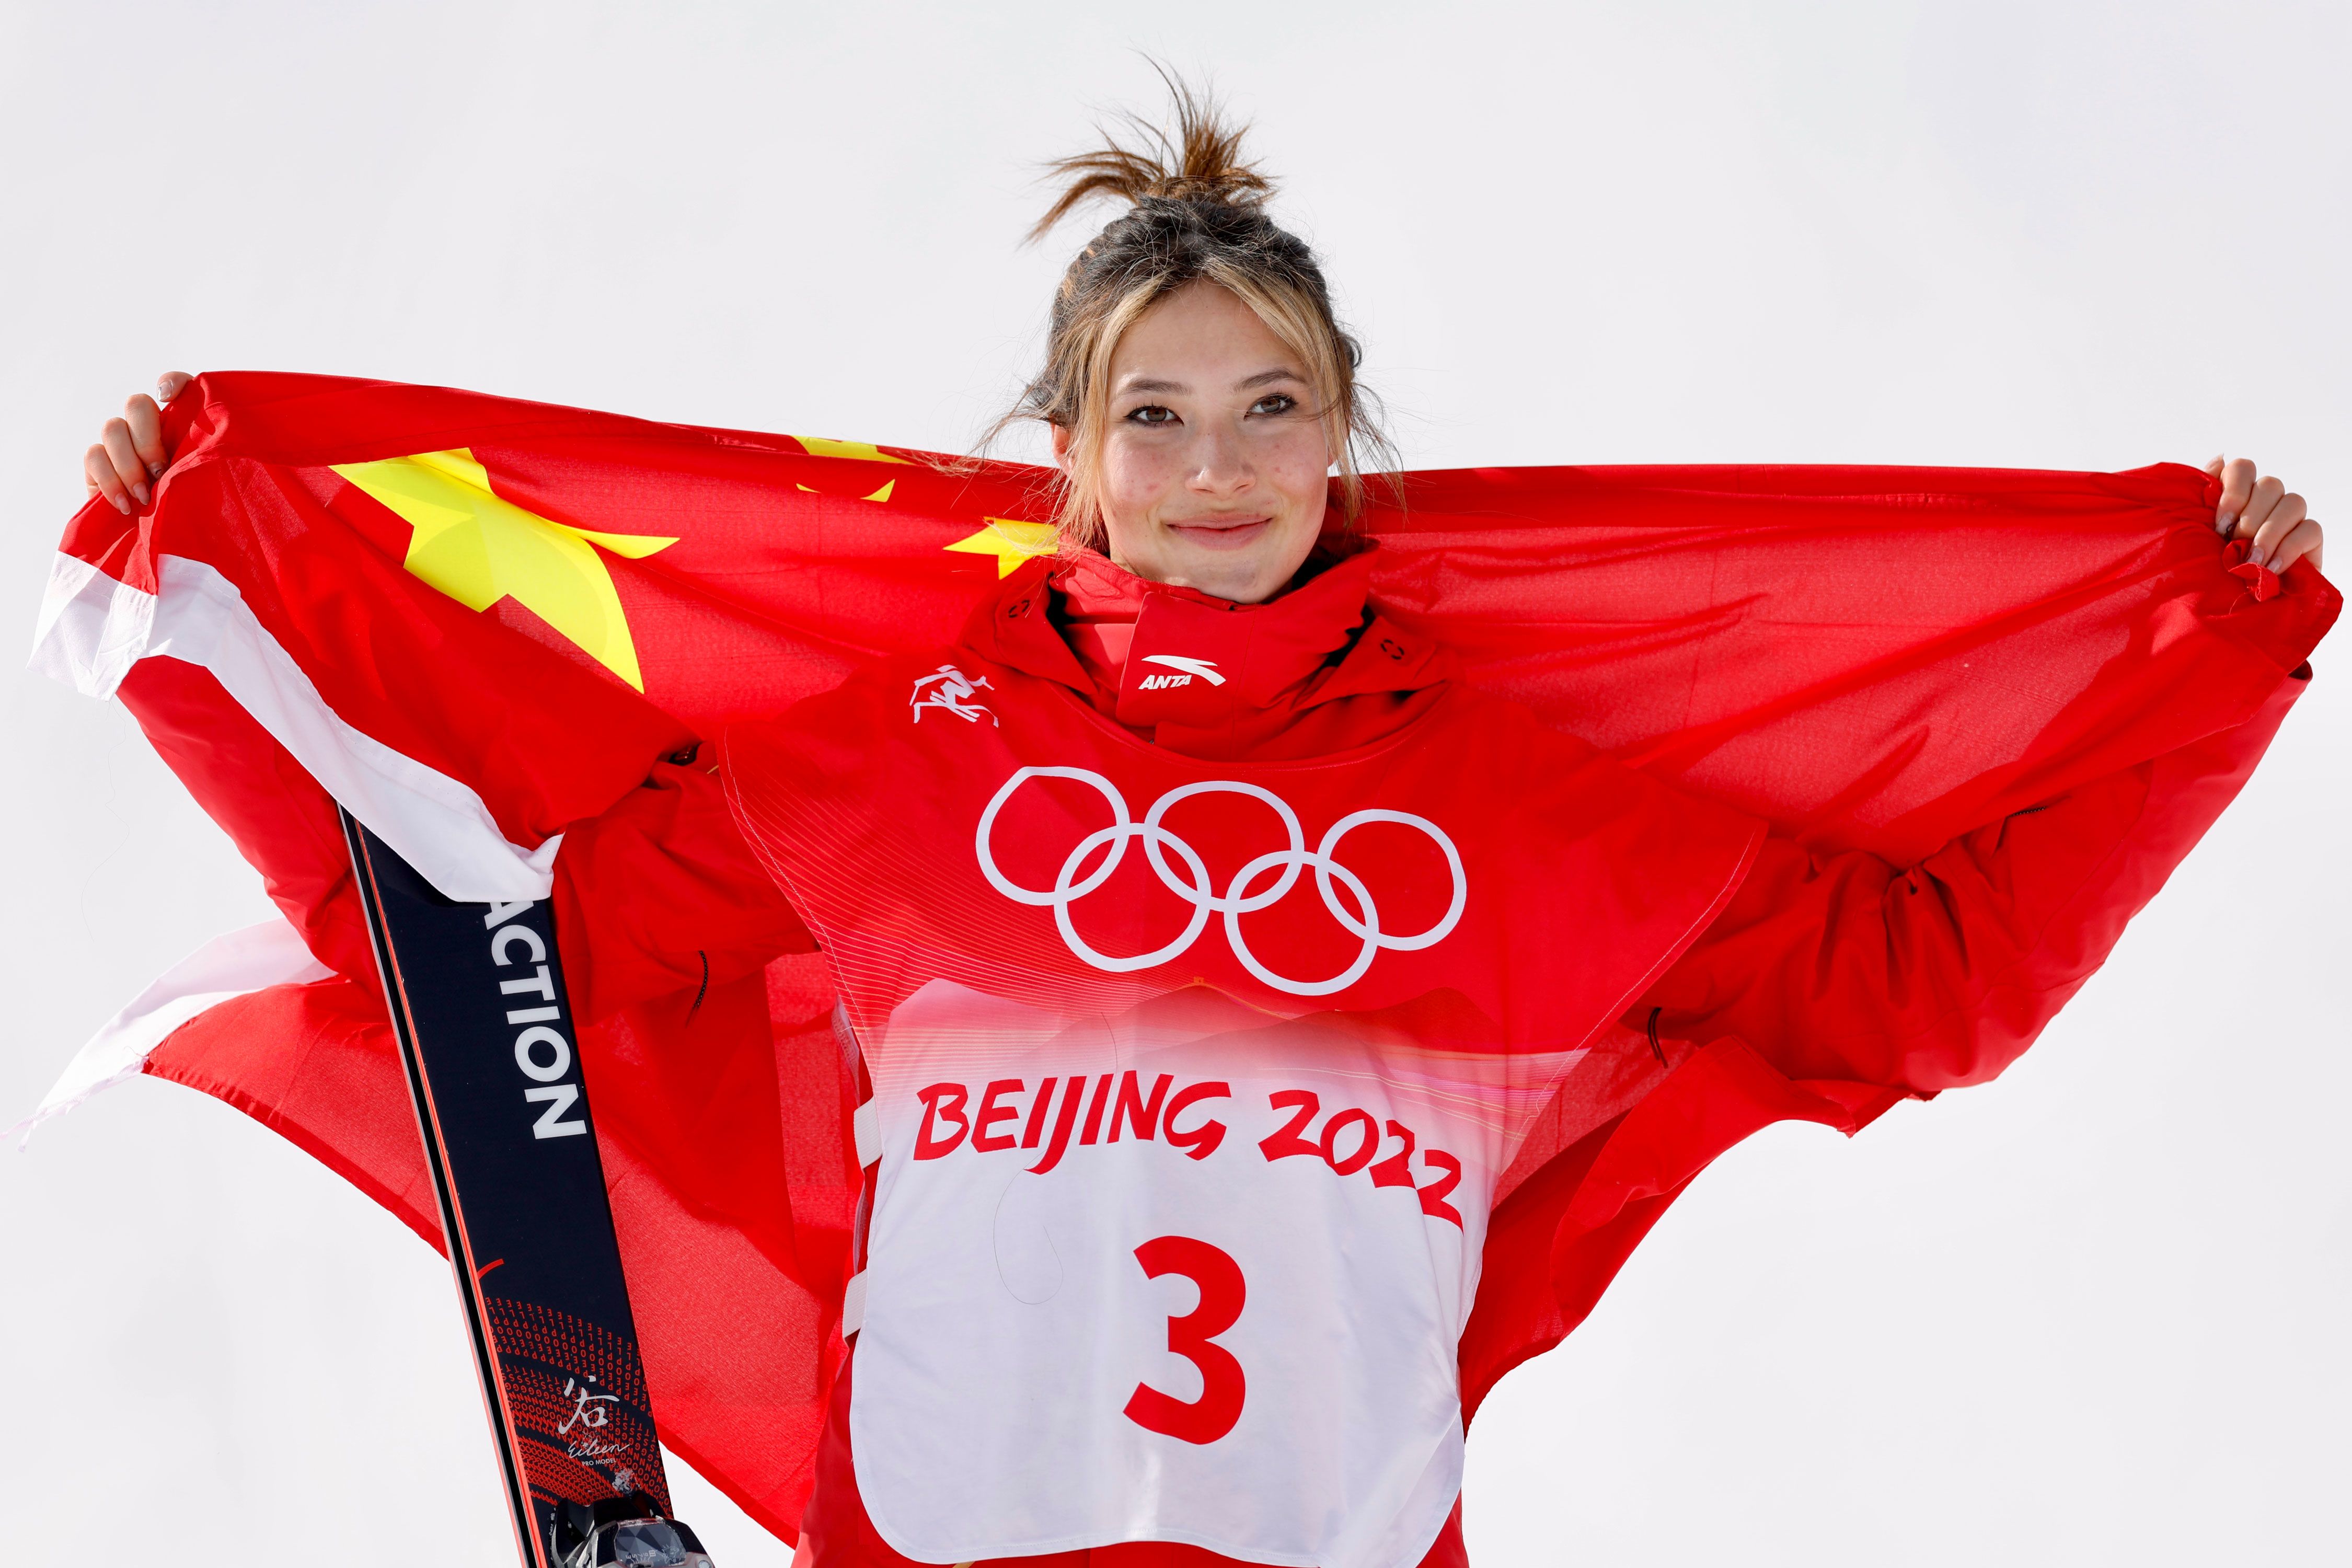 Model Eileen Gu can add a gold medal at the Olympics to her resume